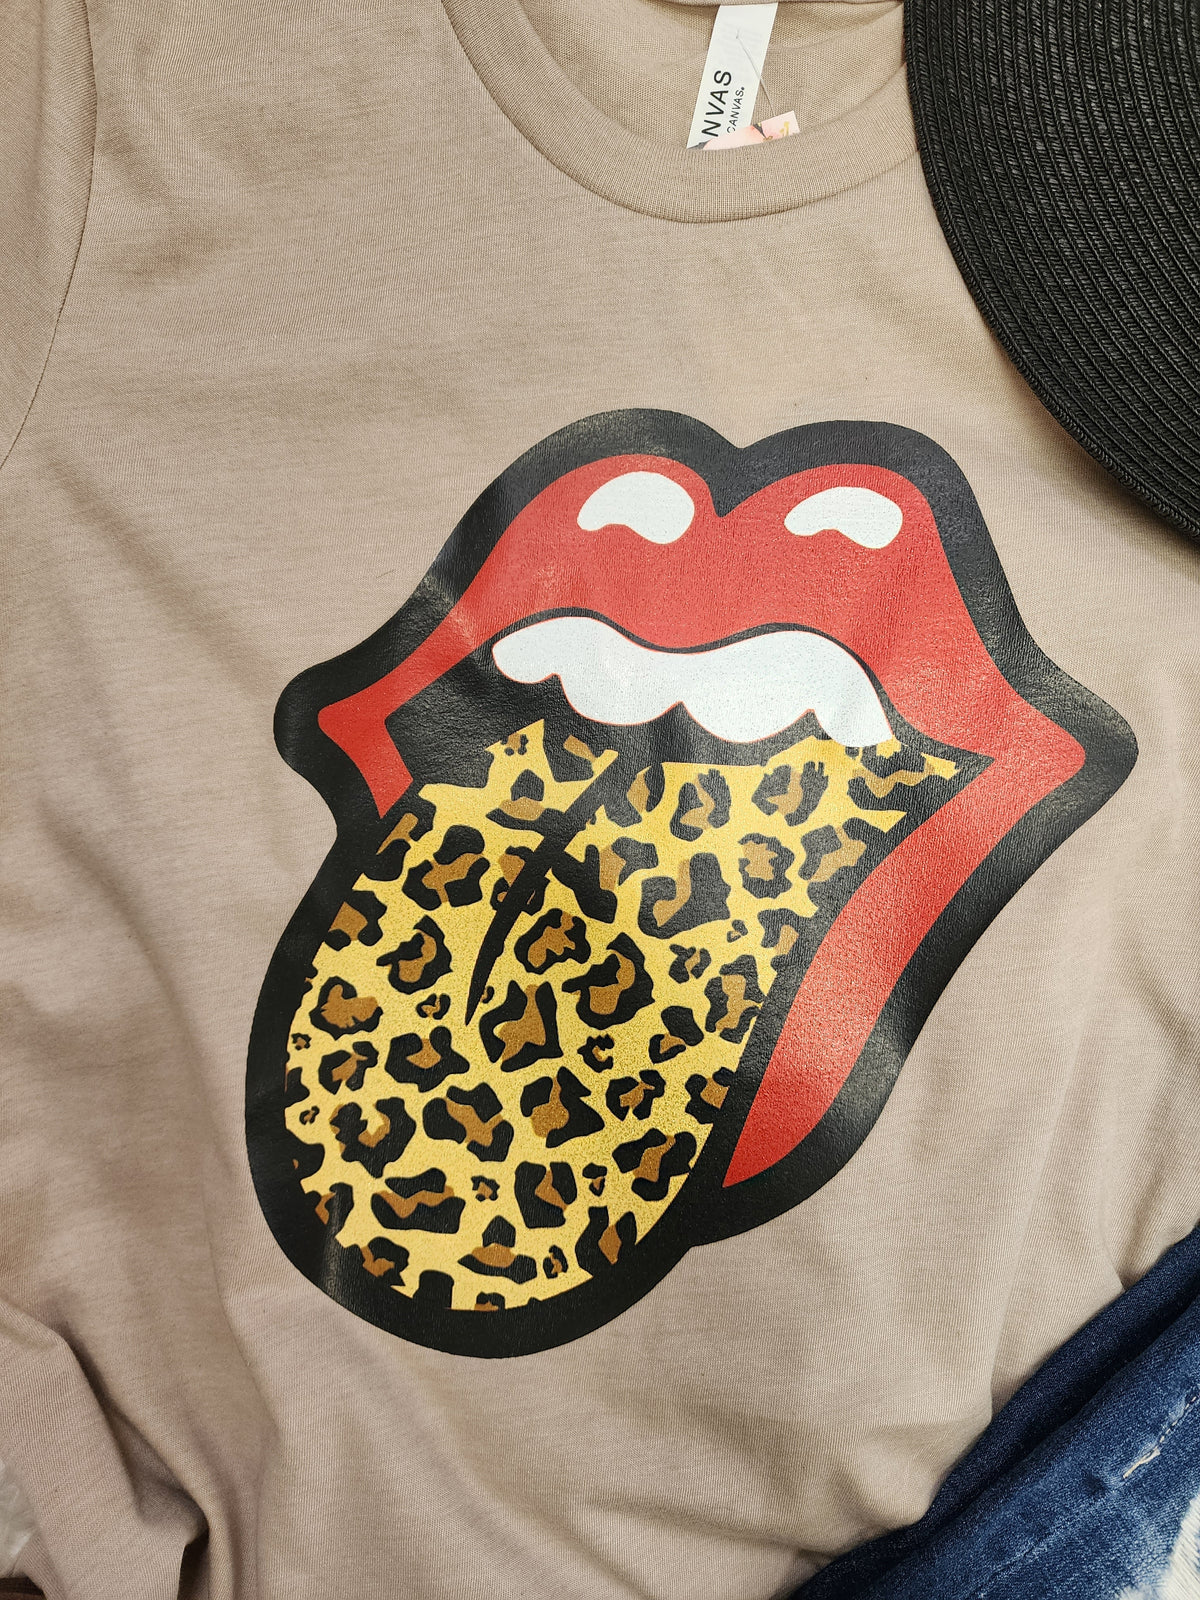 Leopard KISS graphic tee * on sale